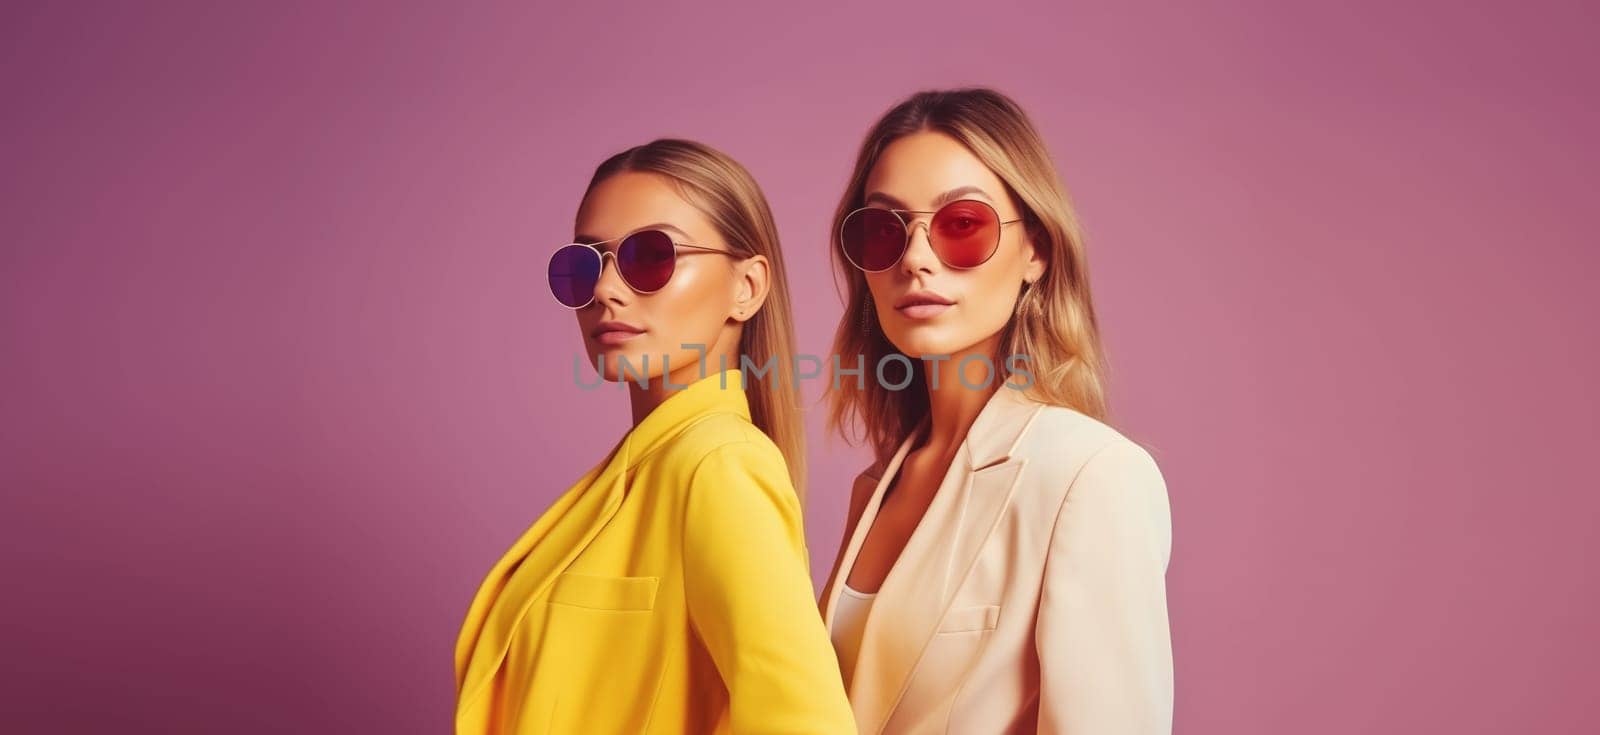 Fashionable portrait of stylish beautiful young two women models in colorful clothes, sunglasses posing on pink studio background